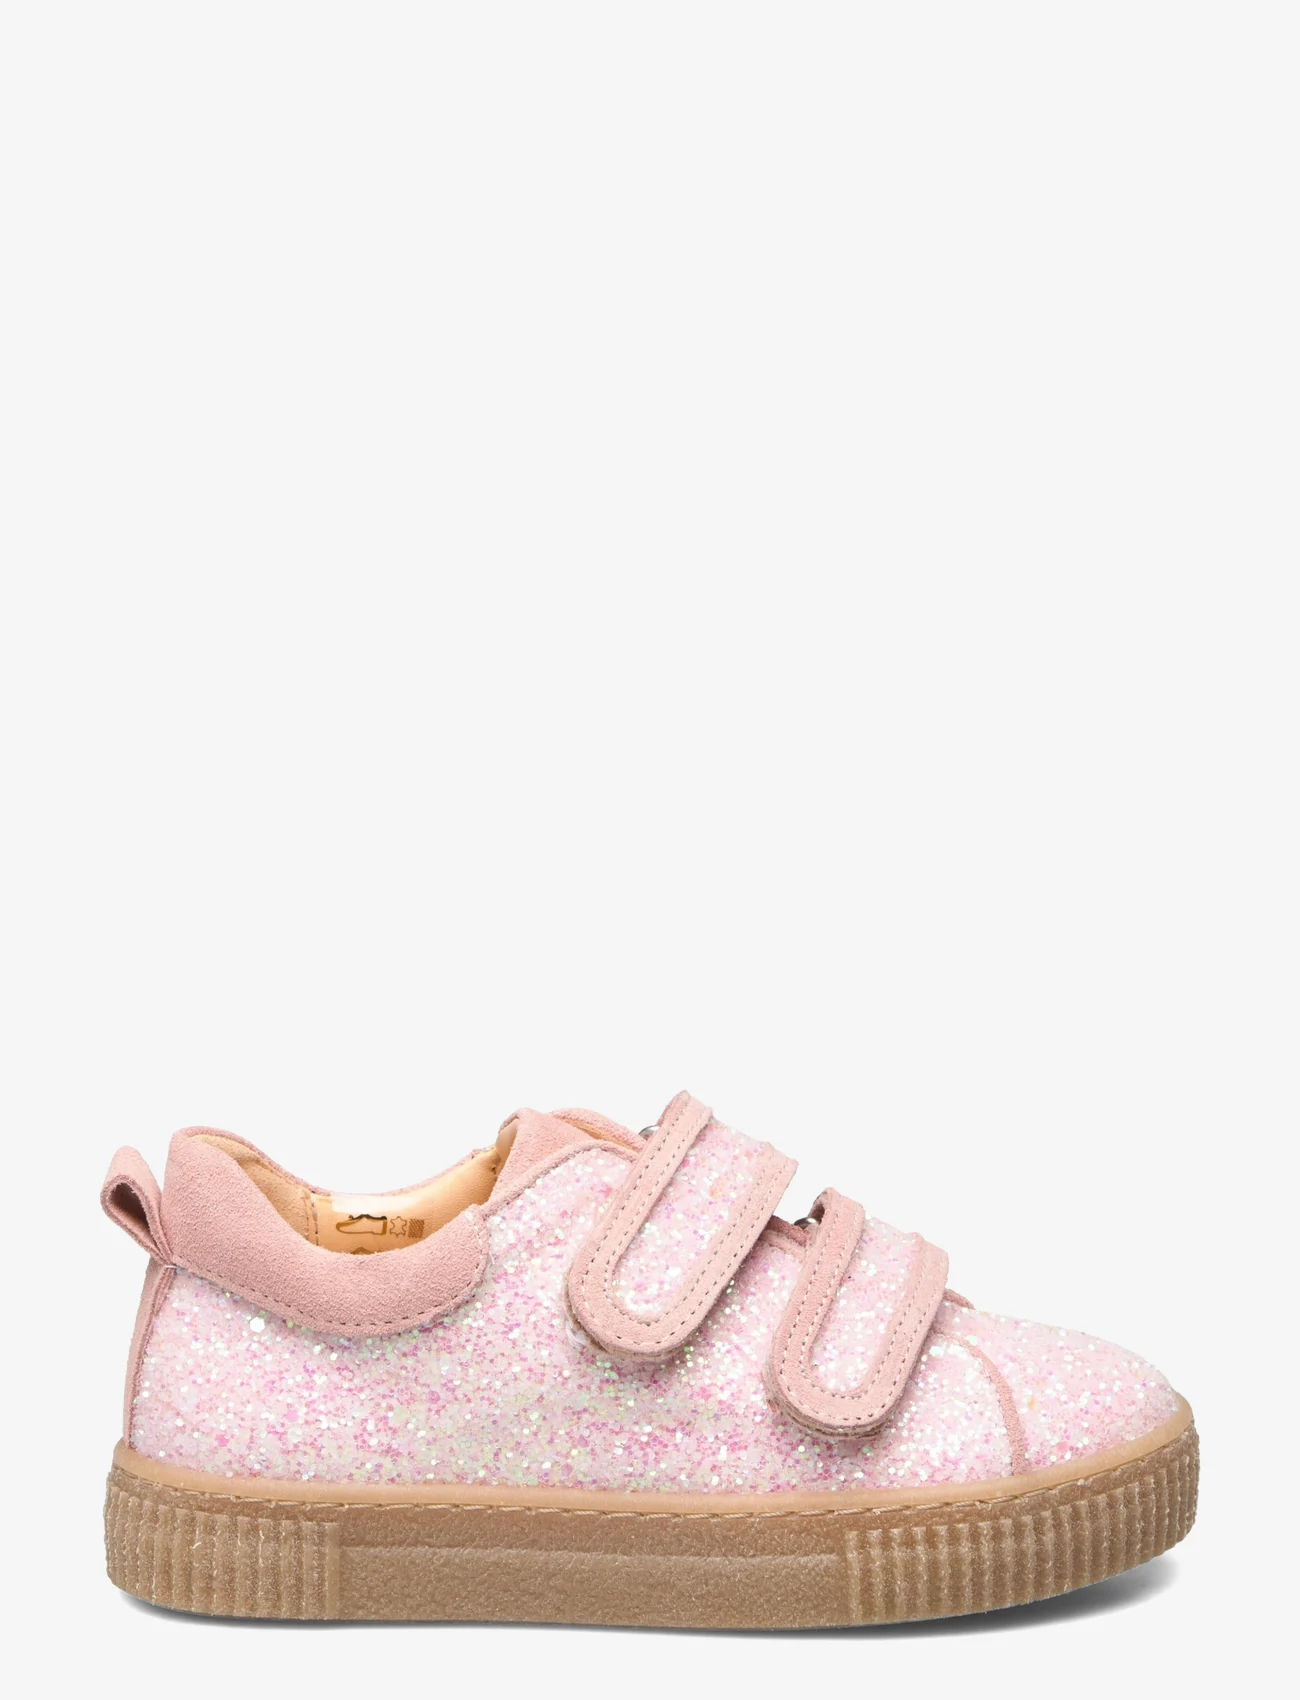 ANGULUS - Shoes - flat - with velcro - sommerschnäppchen - 2698 rosa glitter/peach - 1